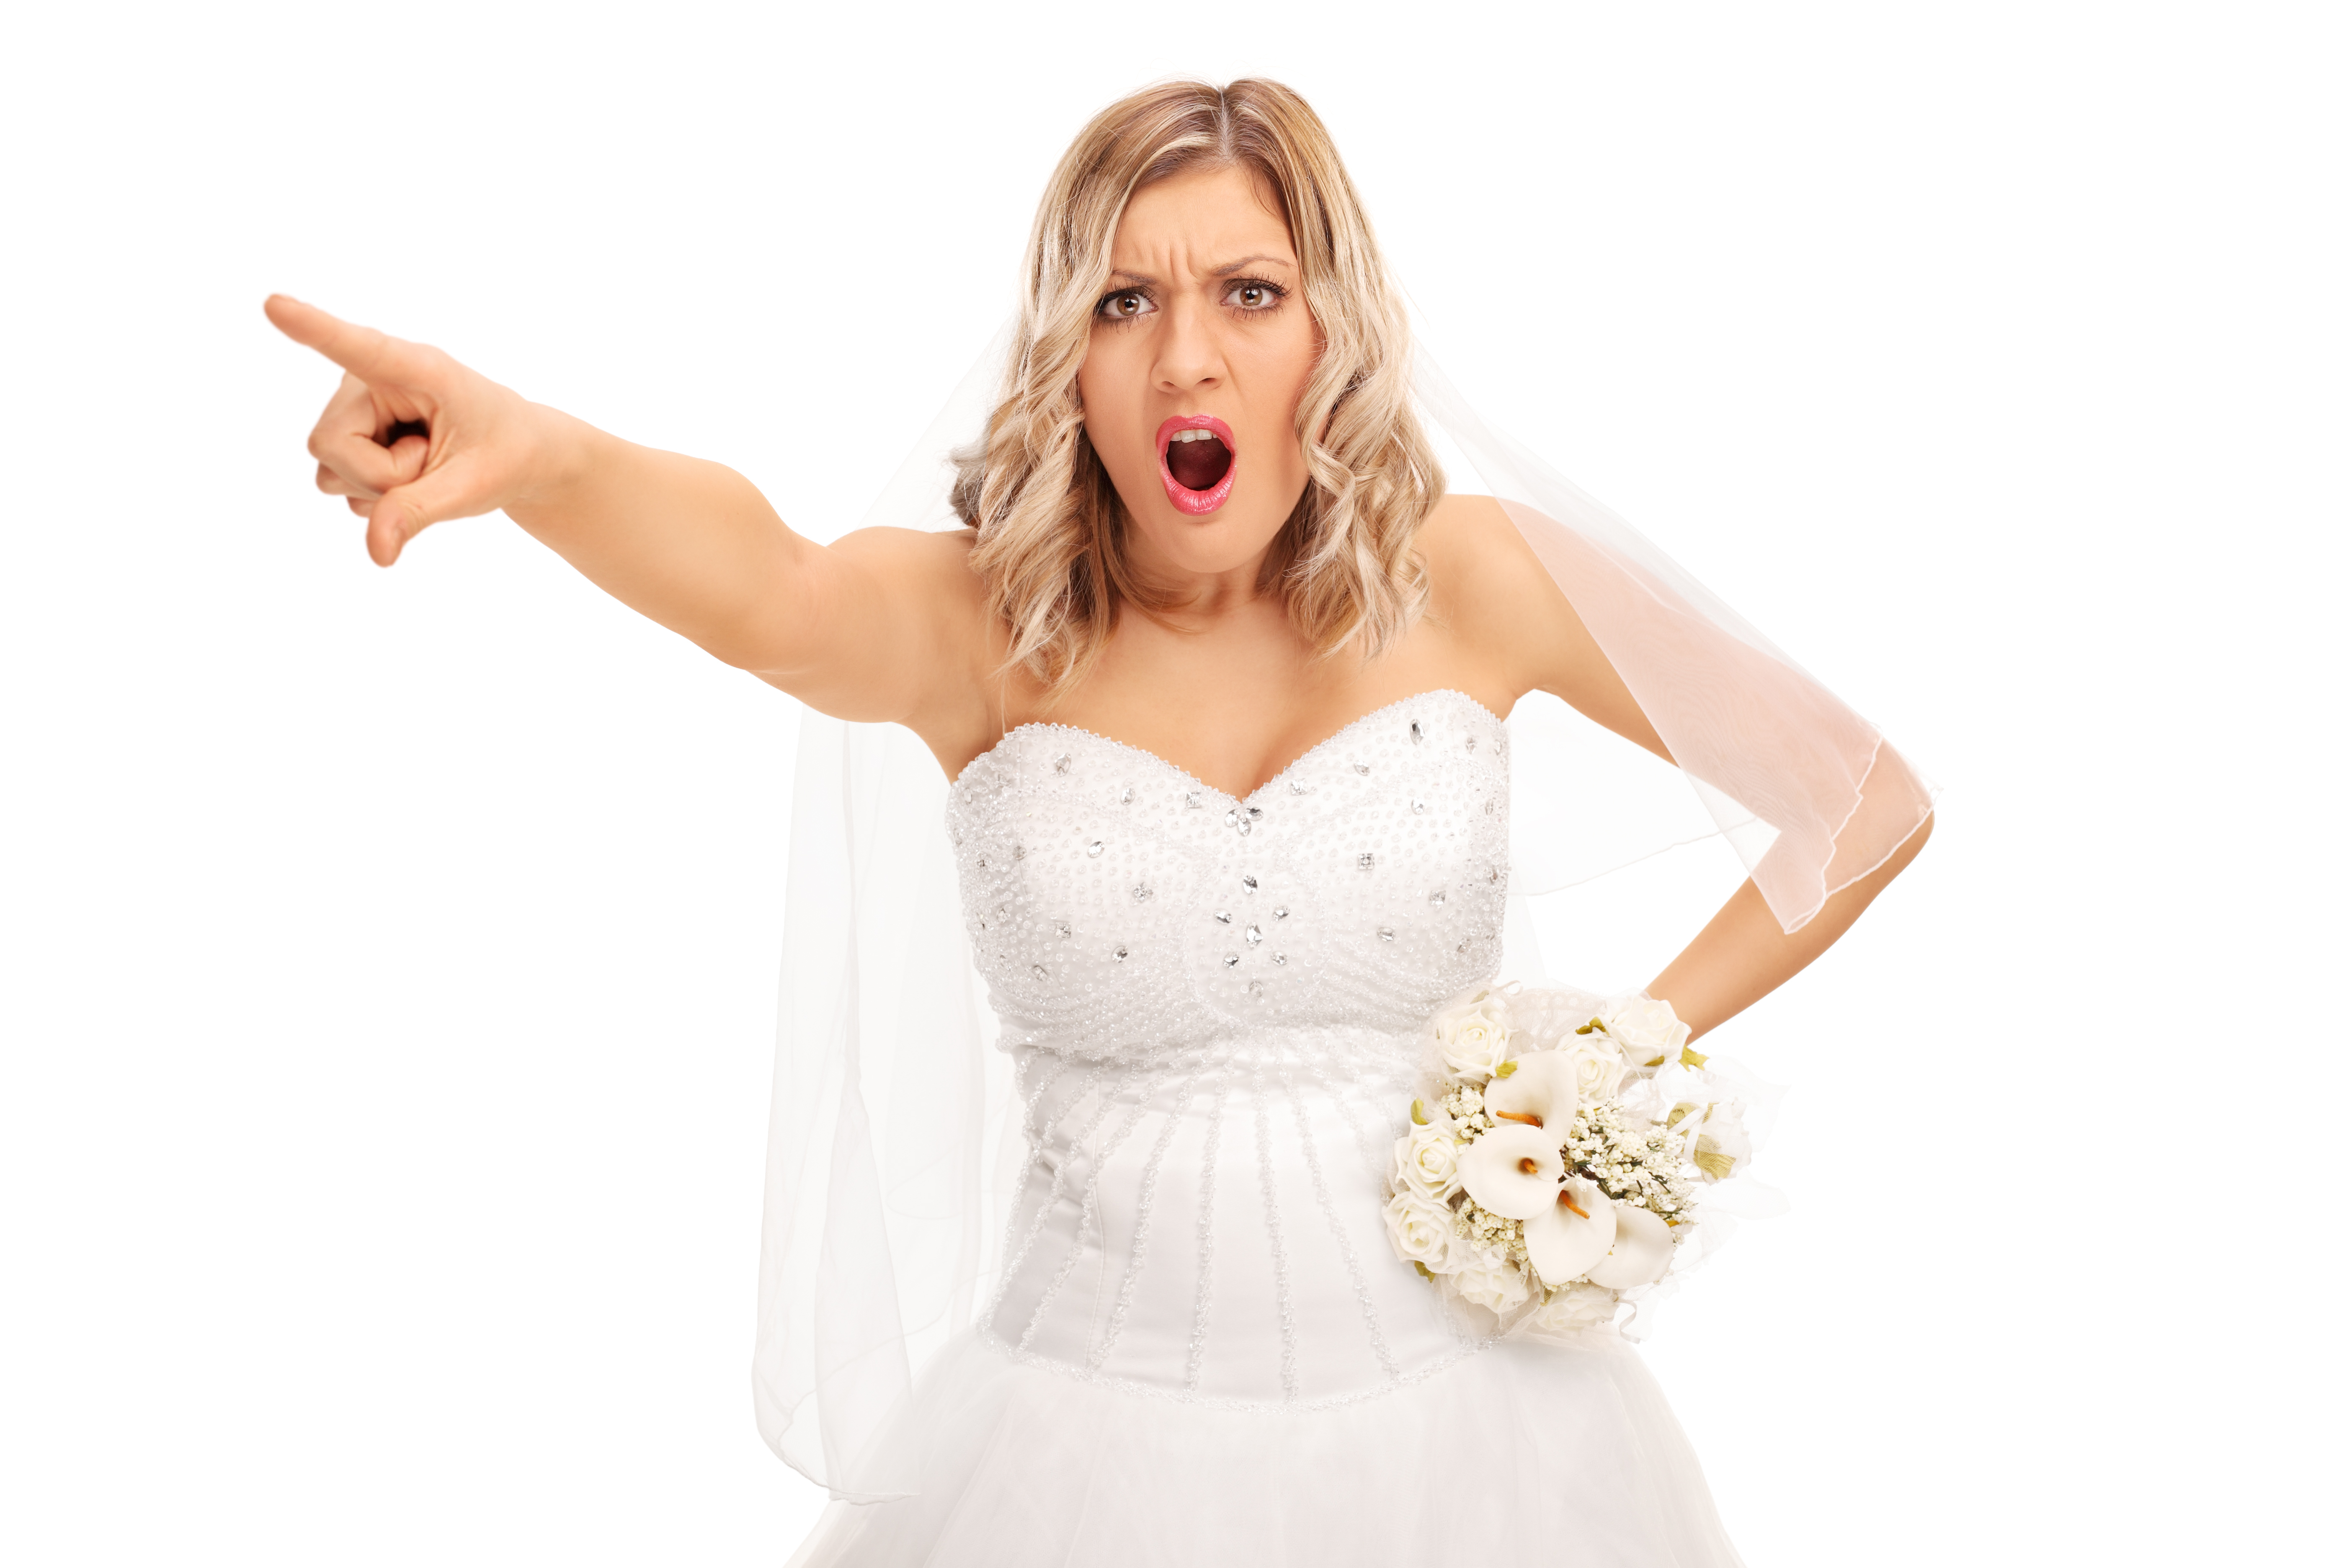 An angry bride pointing outside the frame | Source: Shutterstock